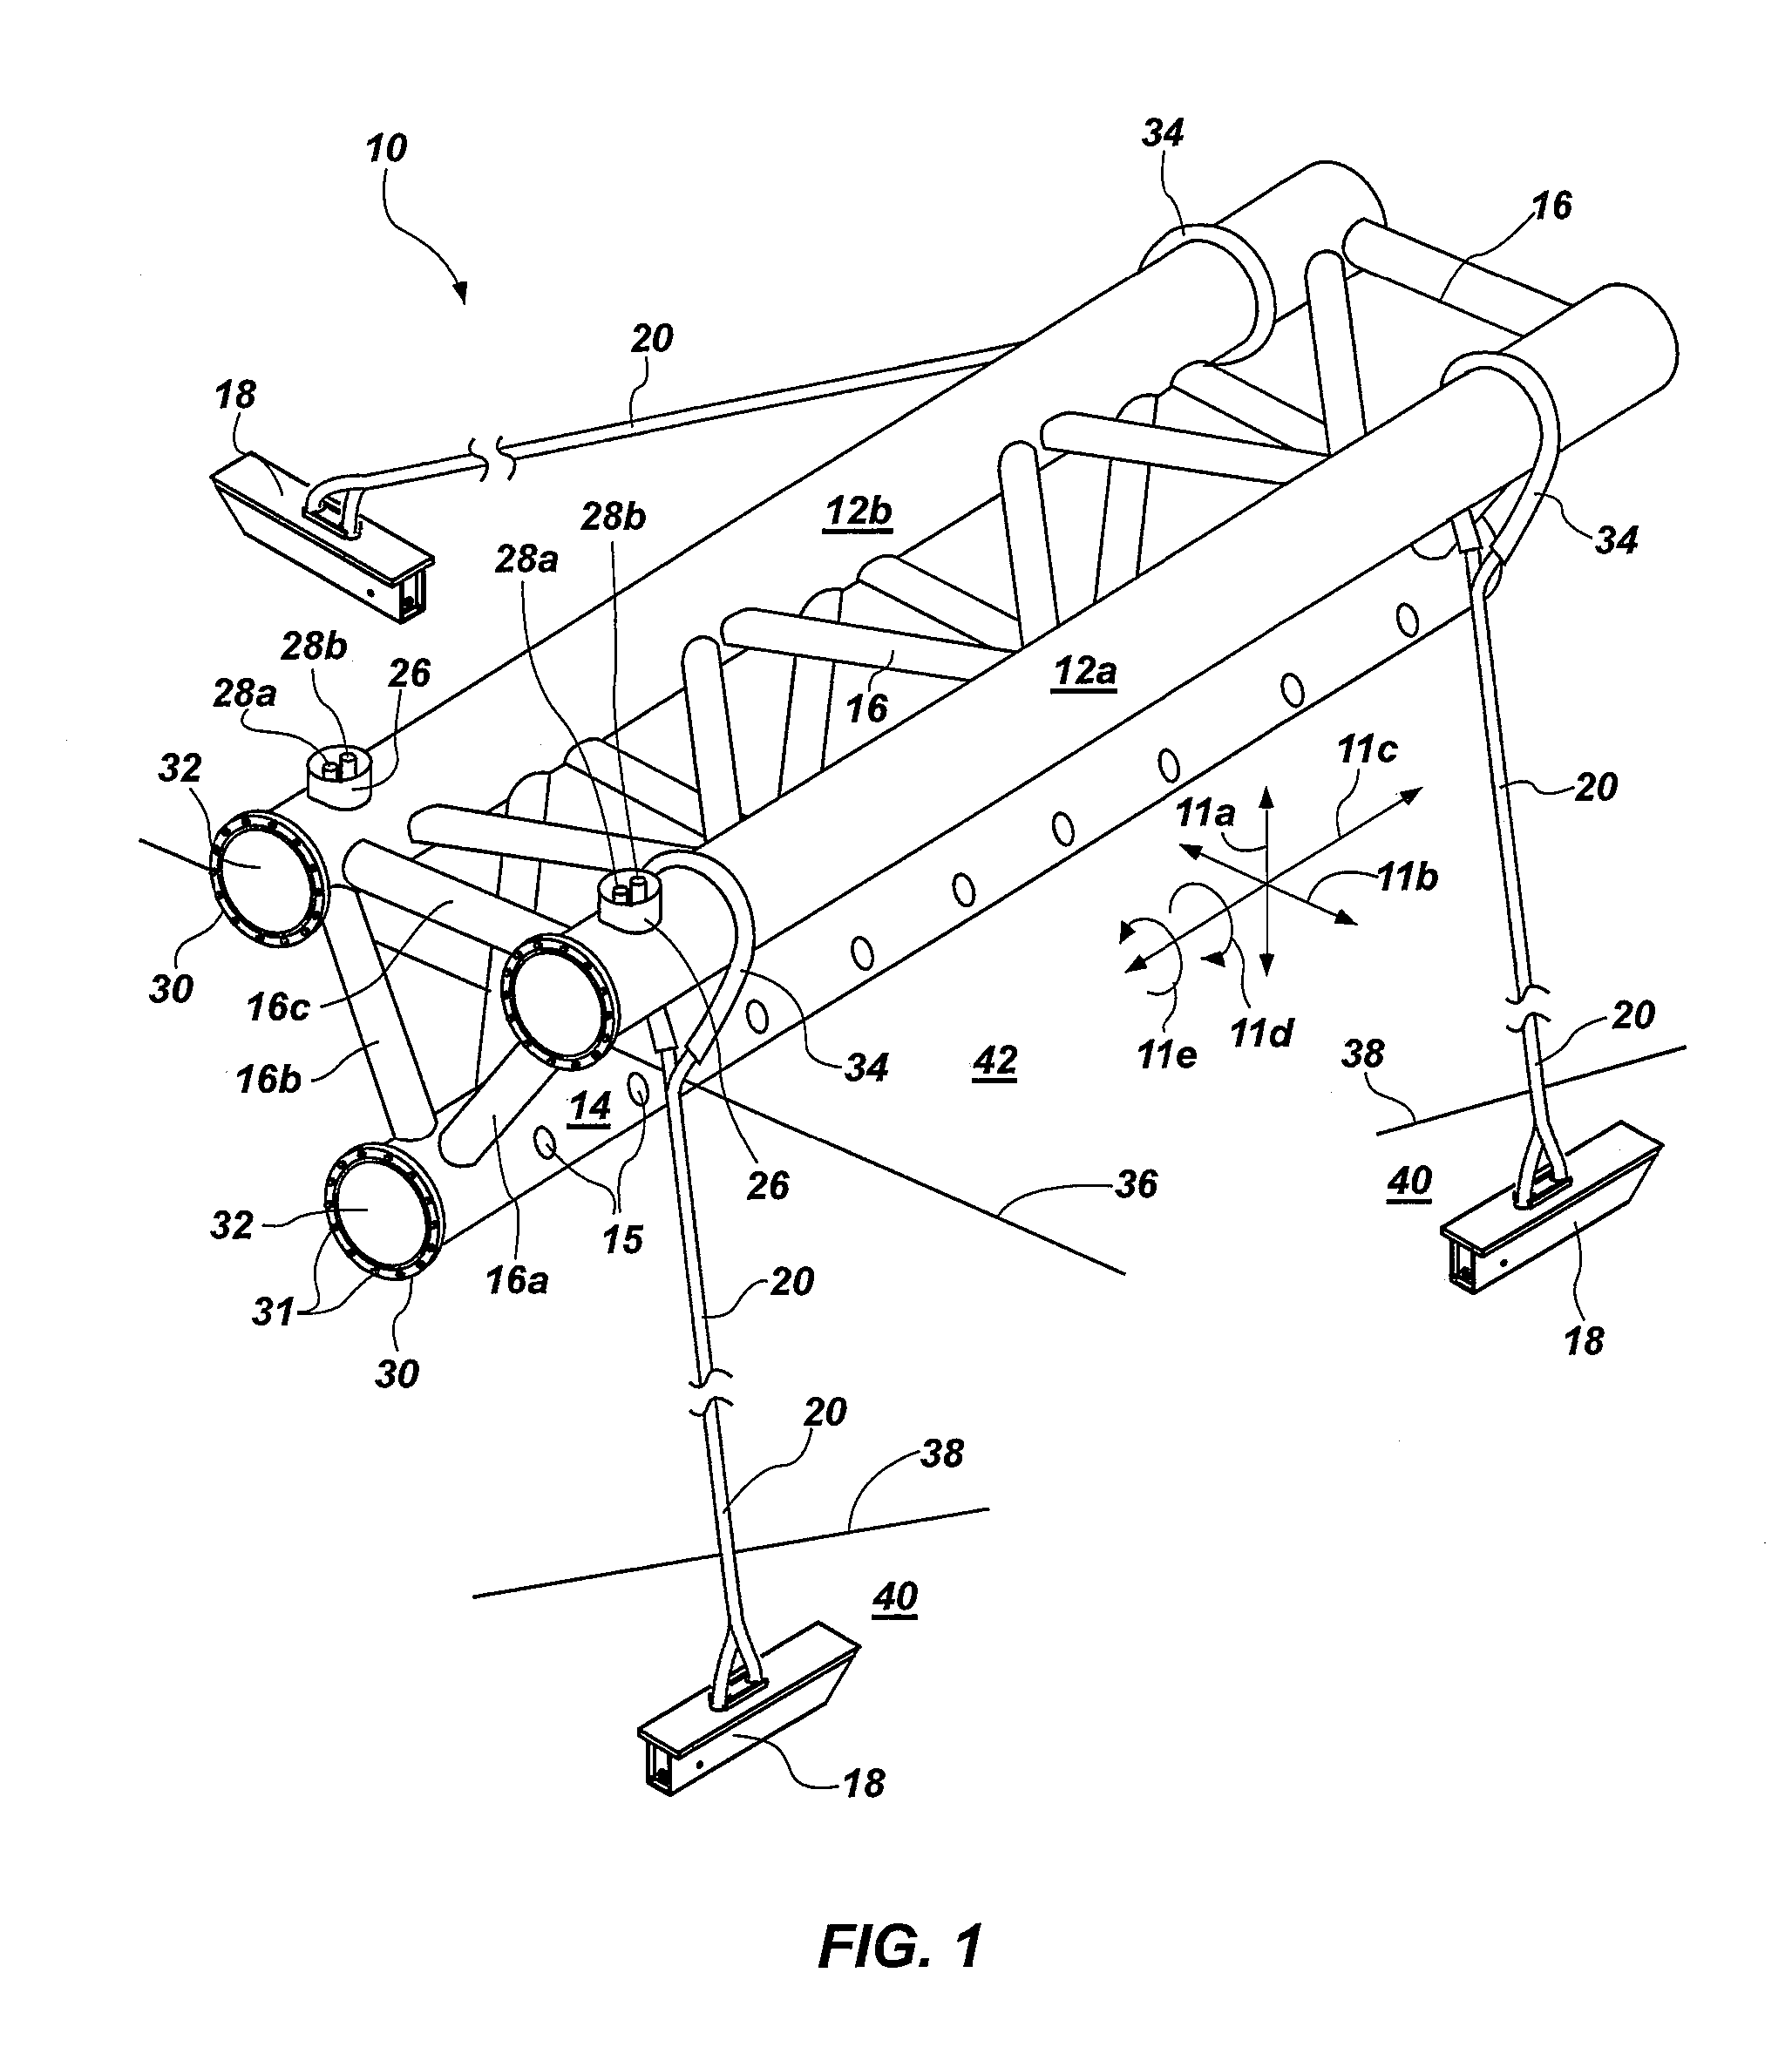 Wave attenuation system and method